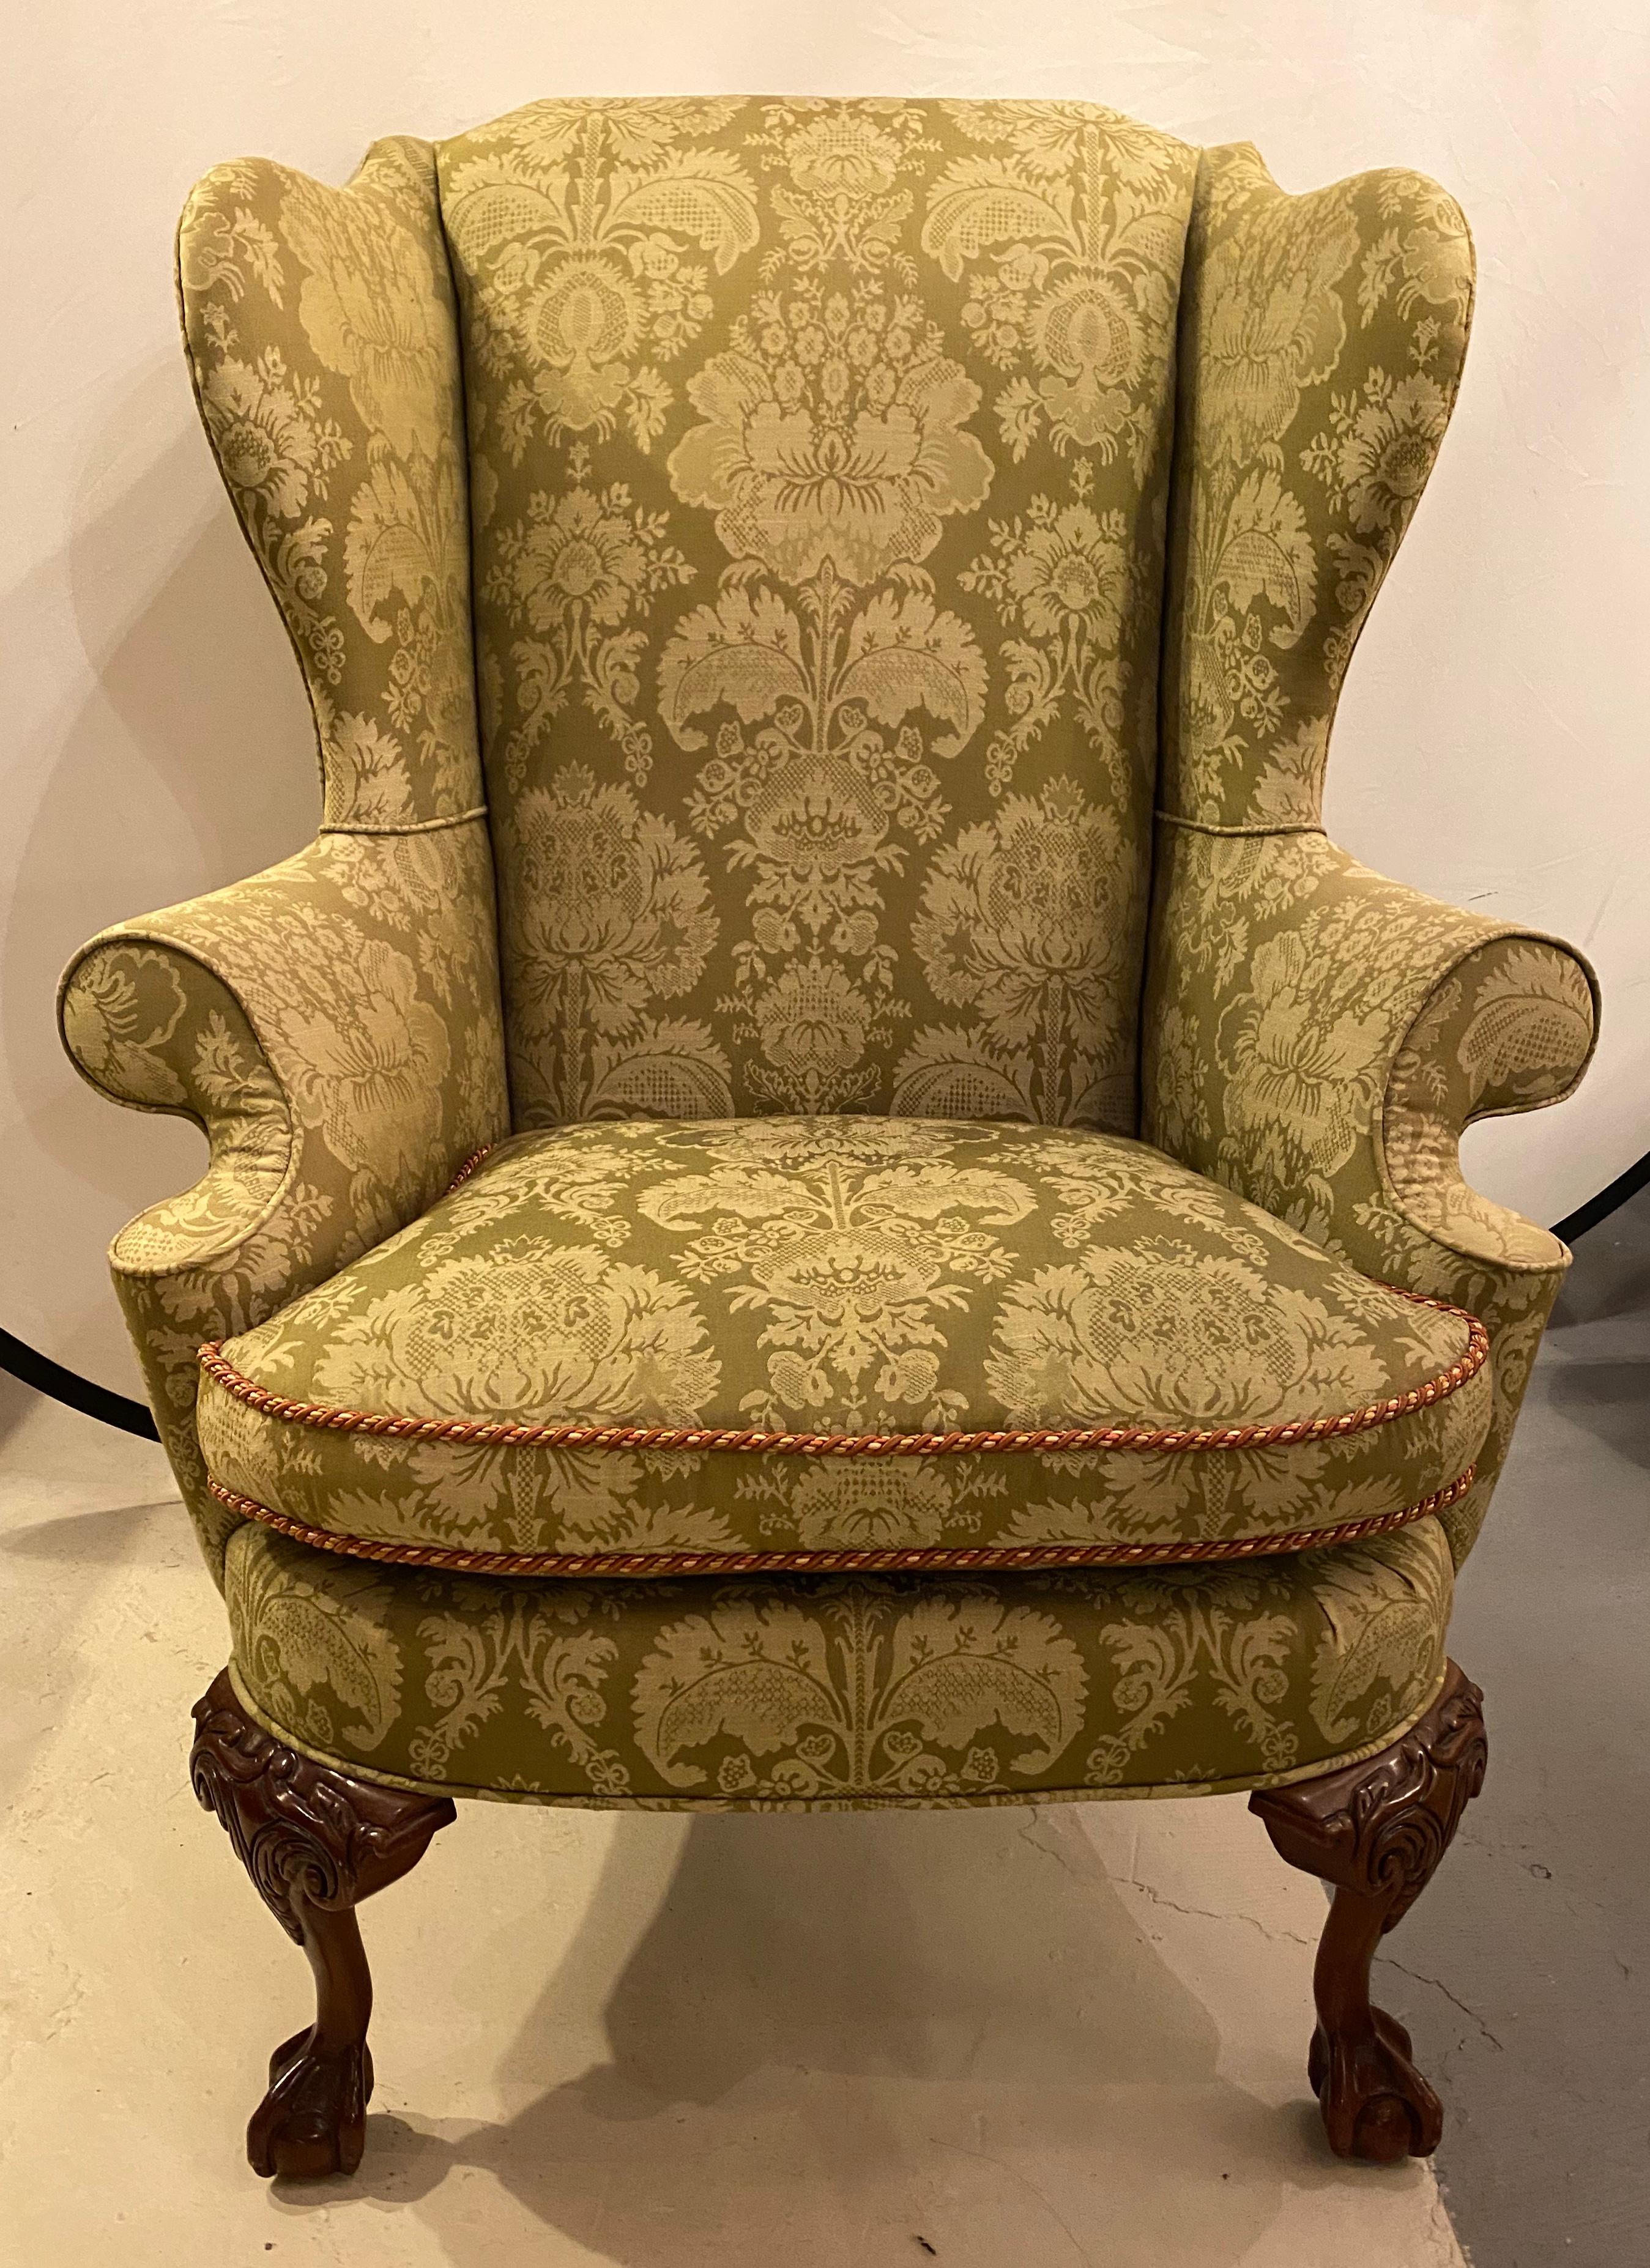 Pair of Chippendale ball and claw wingback chairs with fine scalamandre upholstery. These incredibly upholstered arm, lounge or wingback chairs are simply stunning. The high back style and flair of the Chippendale era come alive in these hard to